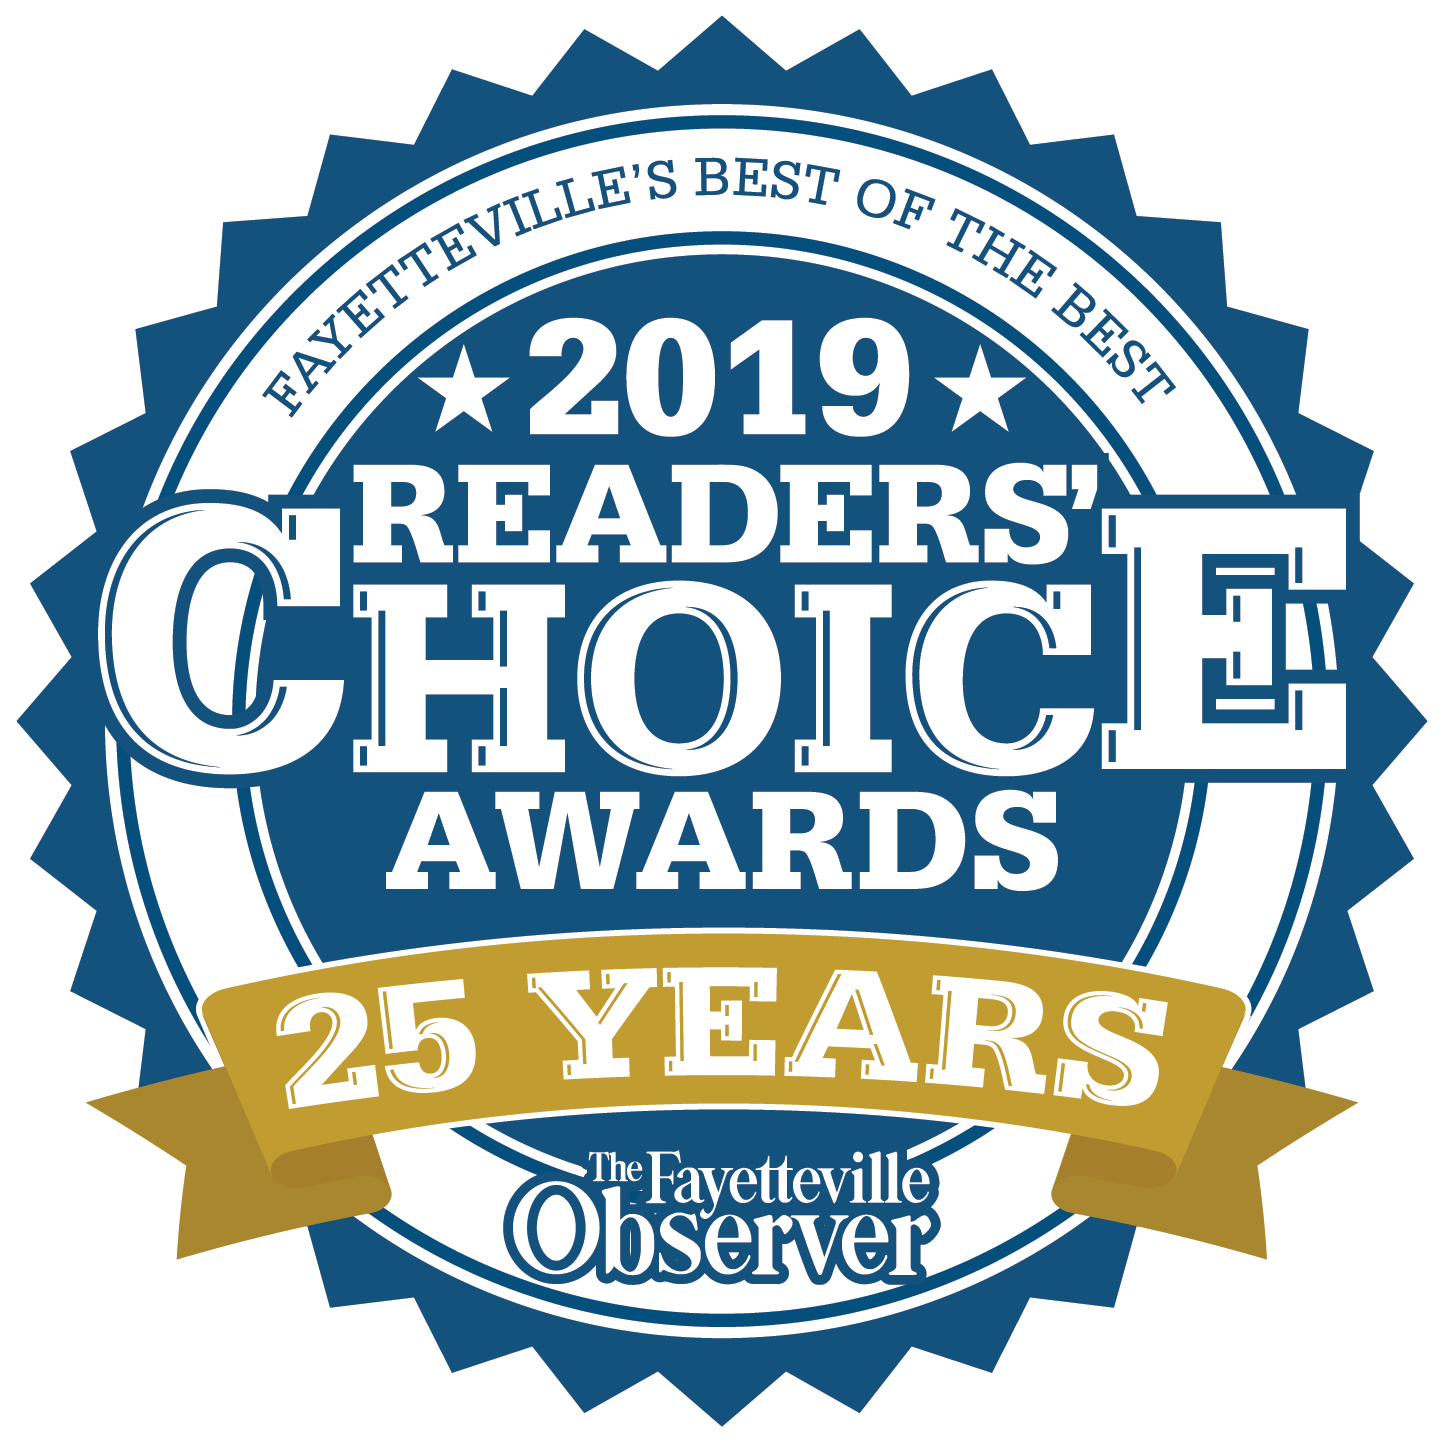 The Fayetteville Observer 2019 Readers' Choice Awards